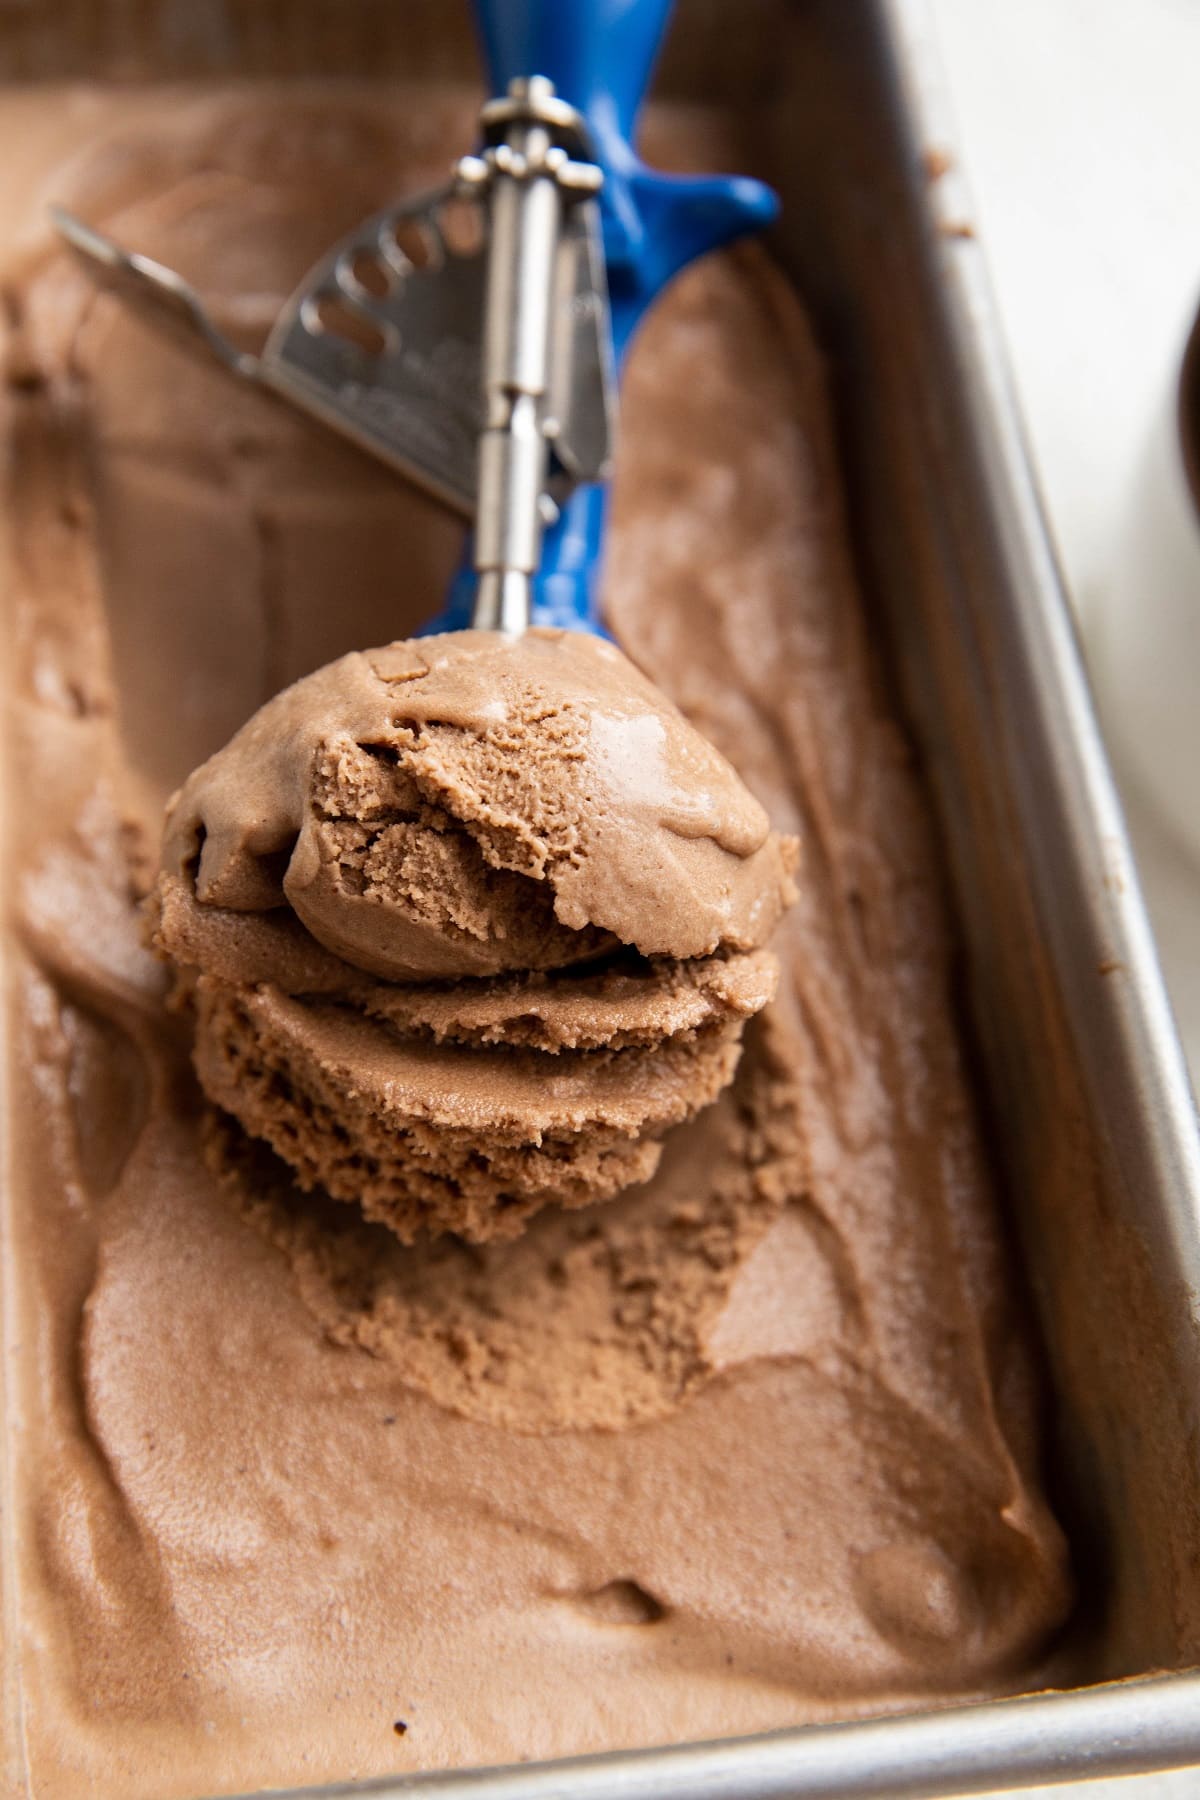 Container of dairy-free chocolate ice cream with an ice cream scoop scooping one scoop of ice cream.